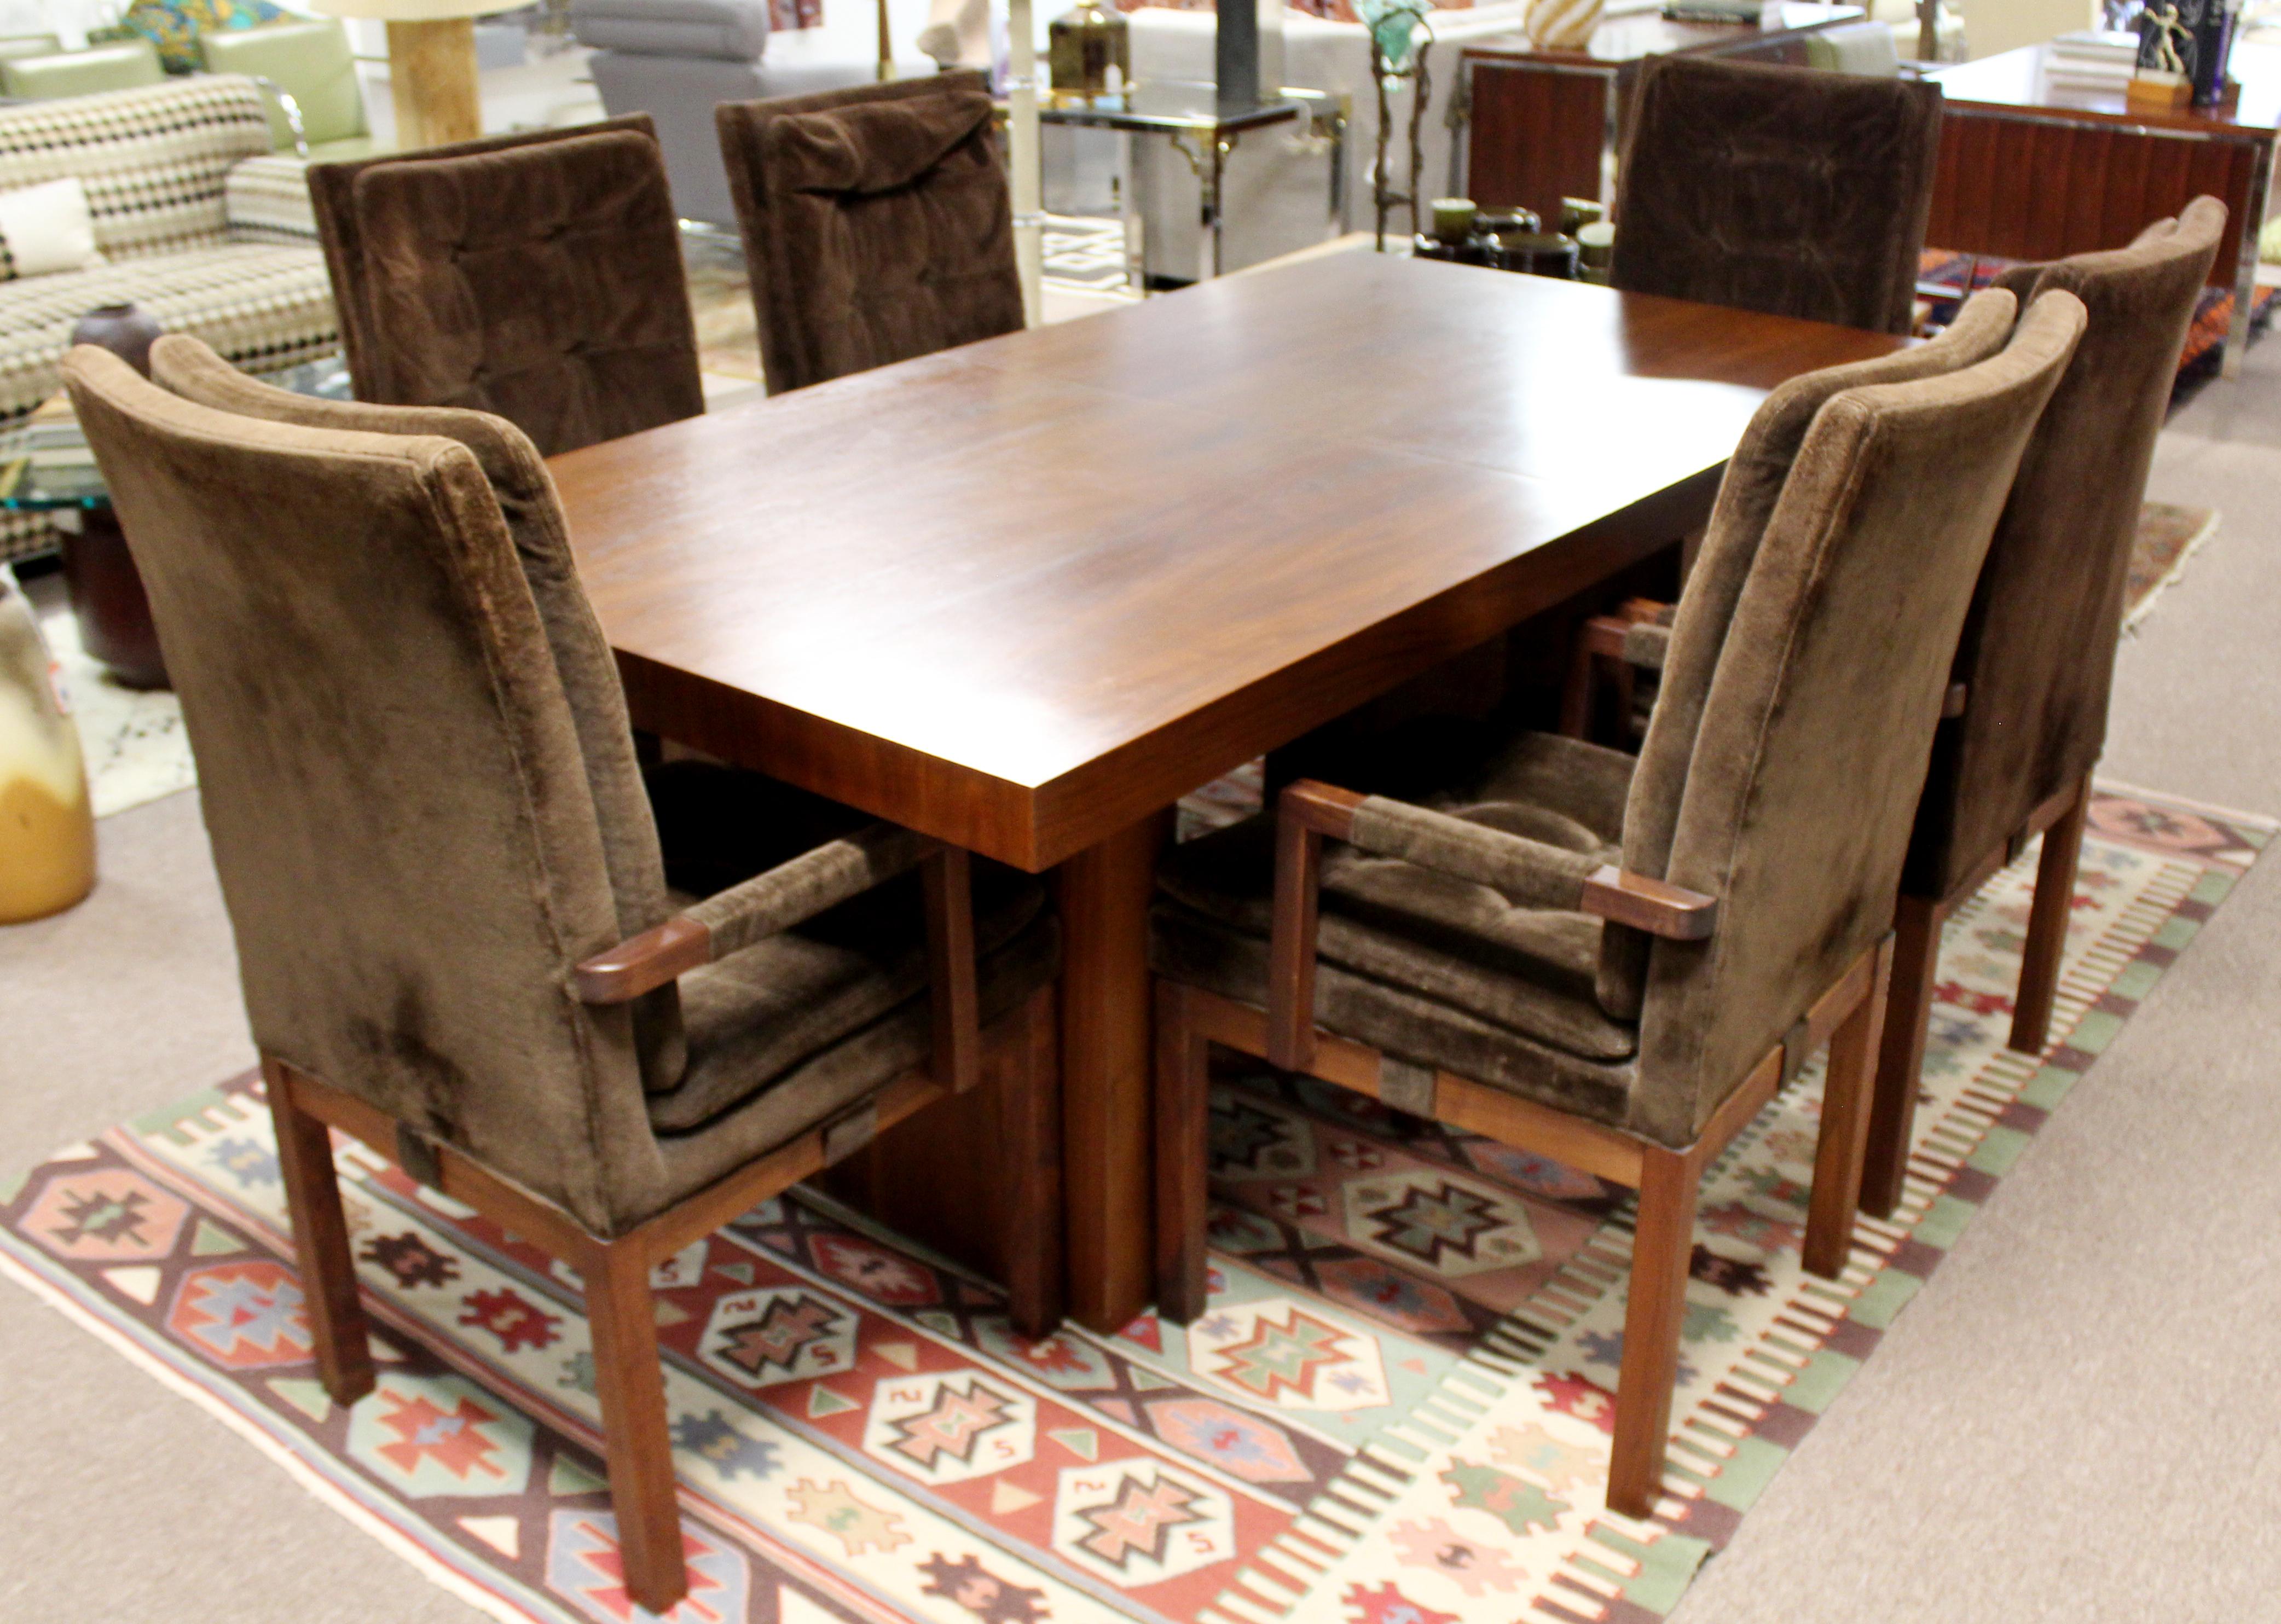 For your consideration is an incredible dining set, with an expandable table and six chairs, designed for Dillingham, circa 1960s. In vintage condition. Can be used as is, or would definitely benefit from additional foam padding. The dimensions of